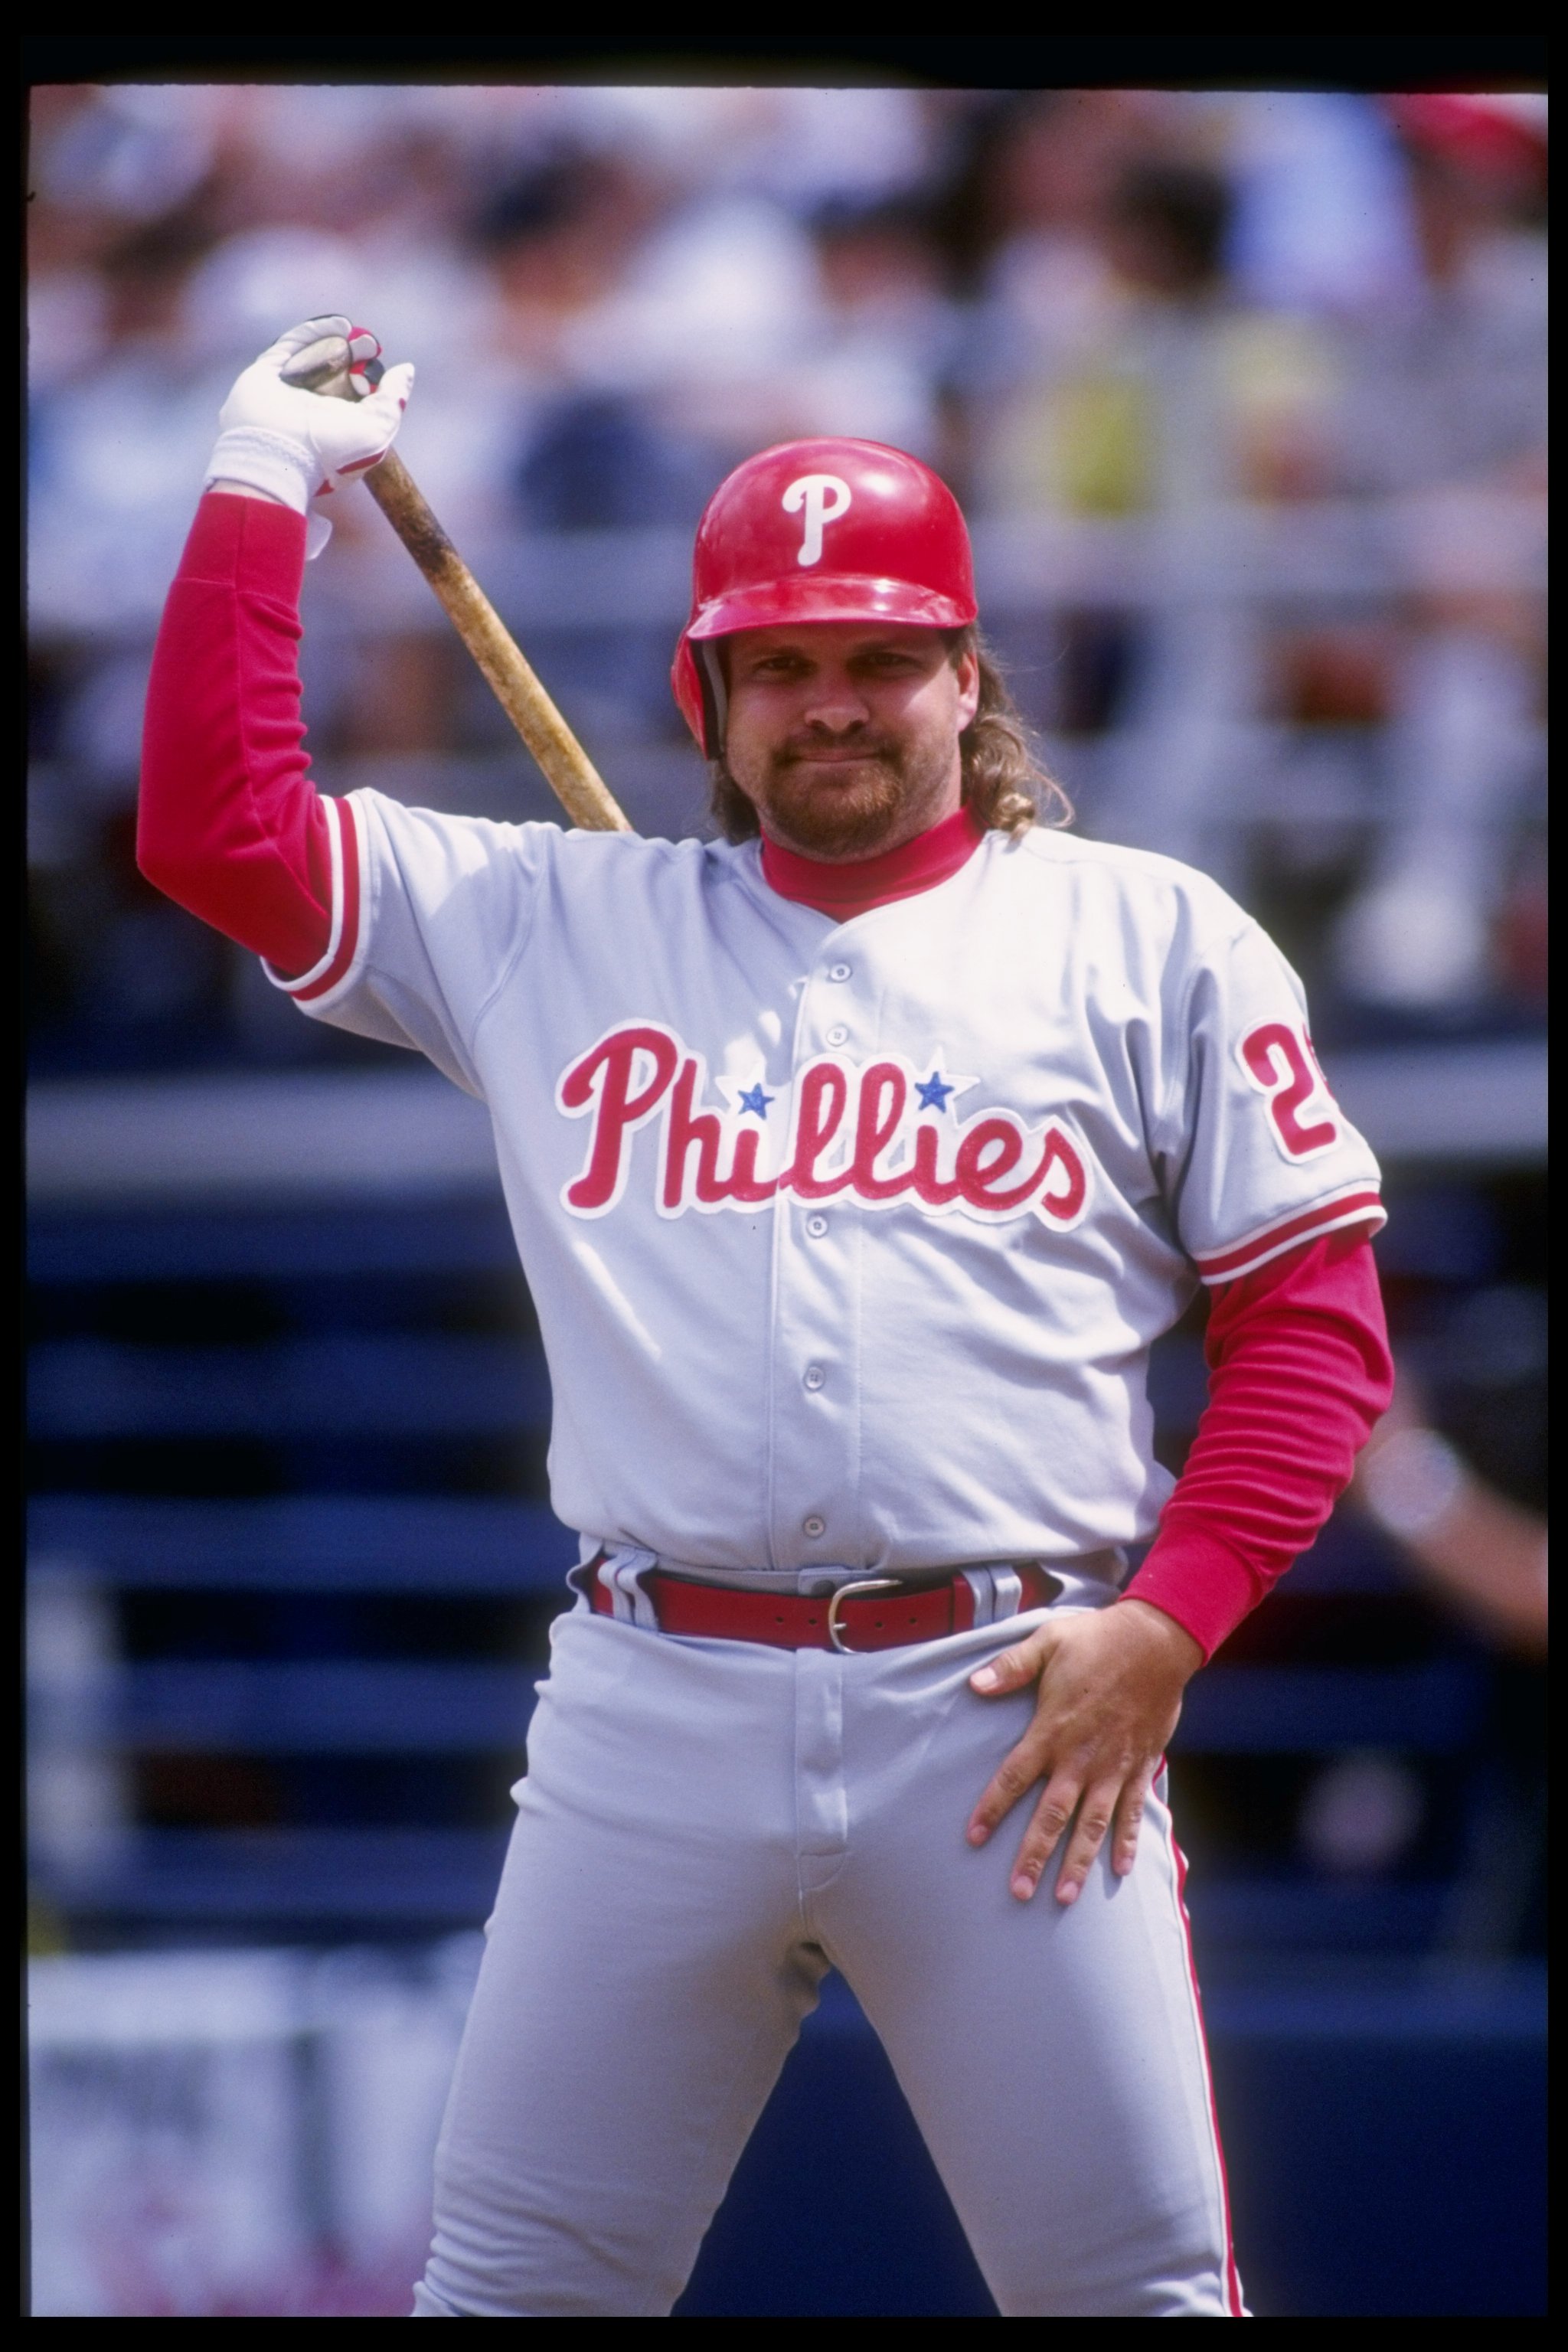 24 Apr 1994: Infielder John Kruk of the Philadelphia Phillies stands on the field during a game against the San Diego Padres at Jack Murphy Stadium in San Diego, California.